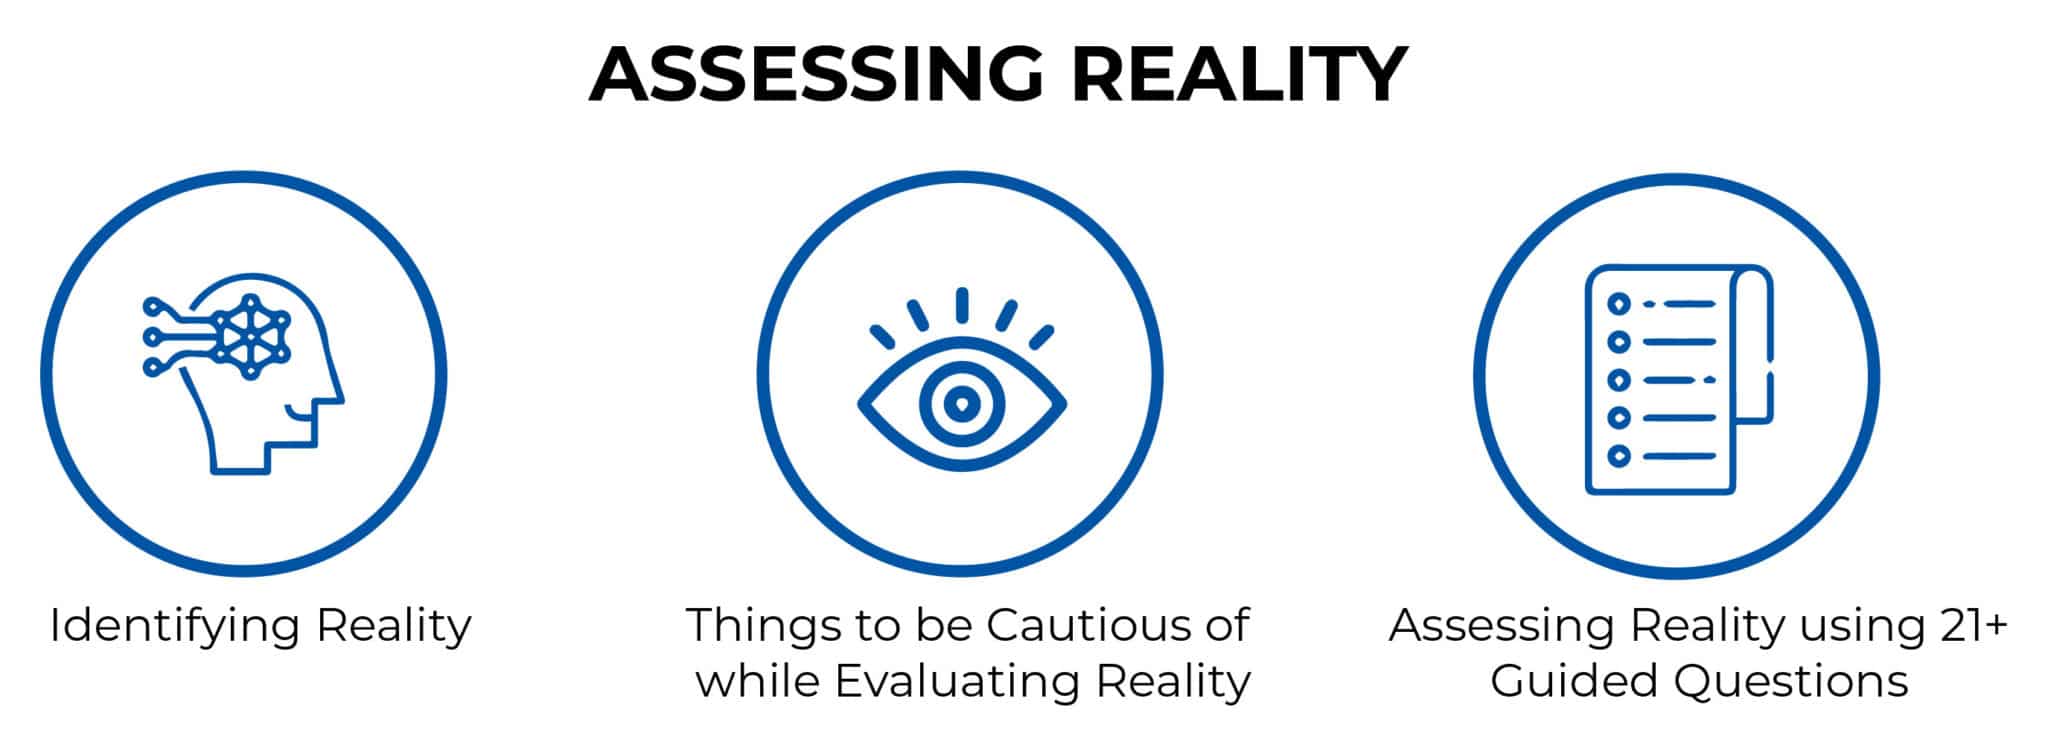 ASSESSING REALITY